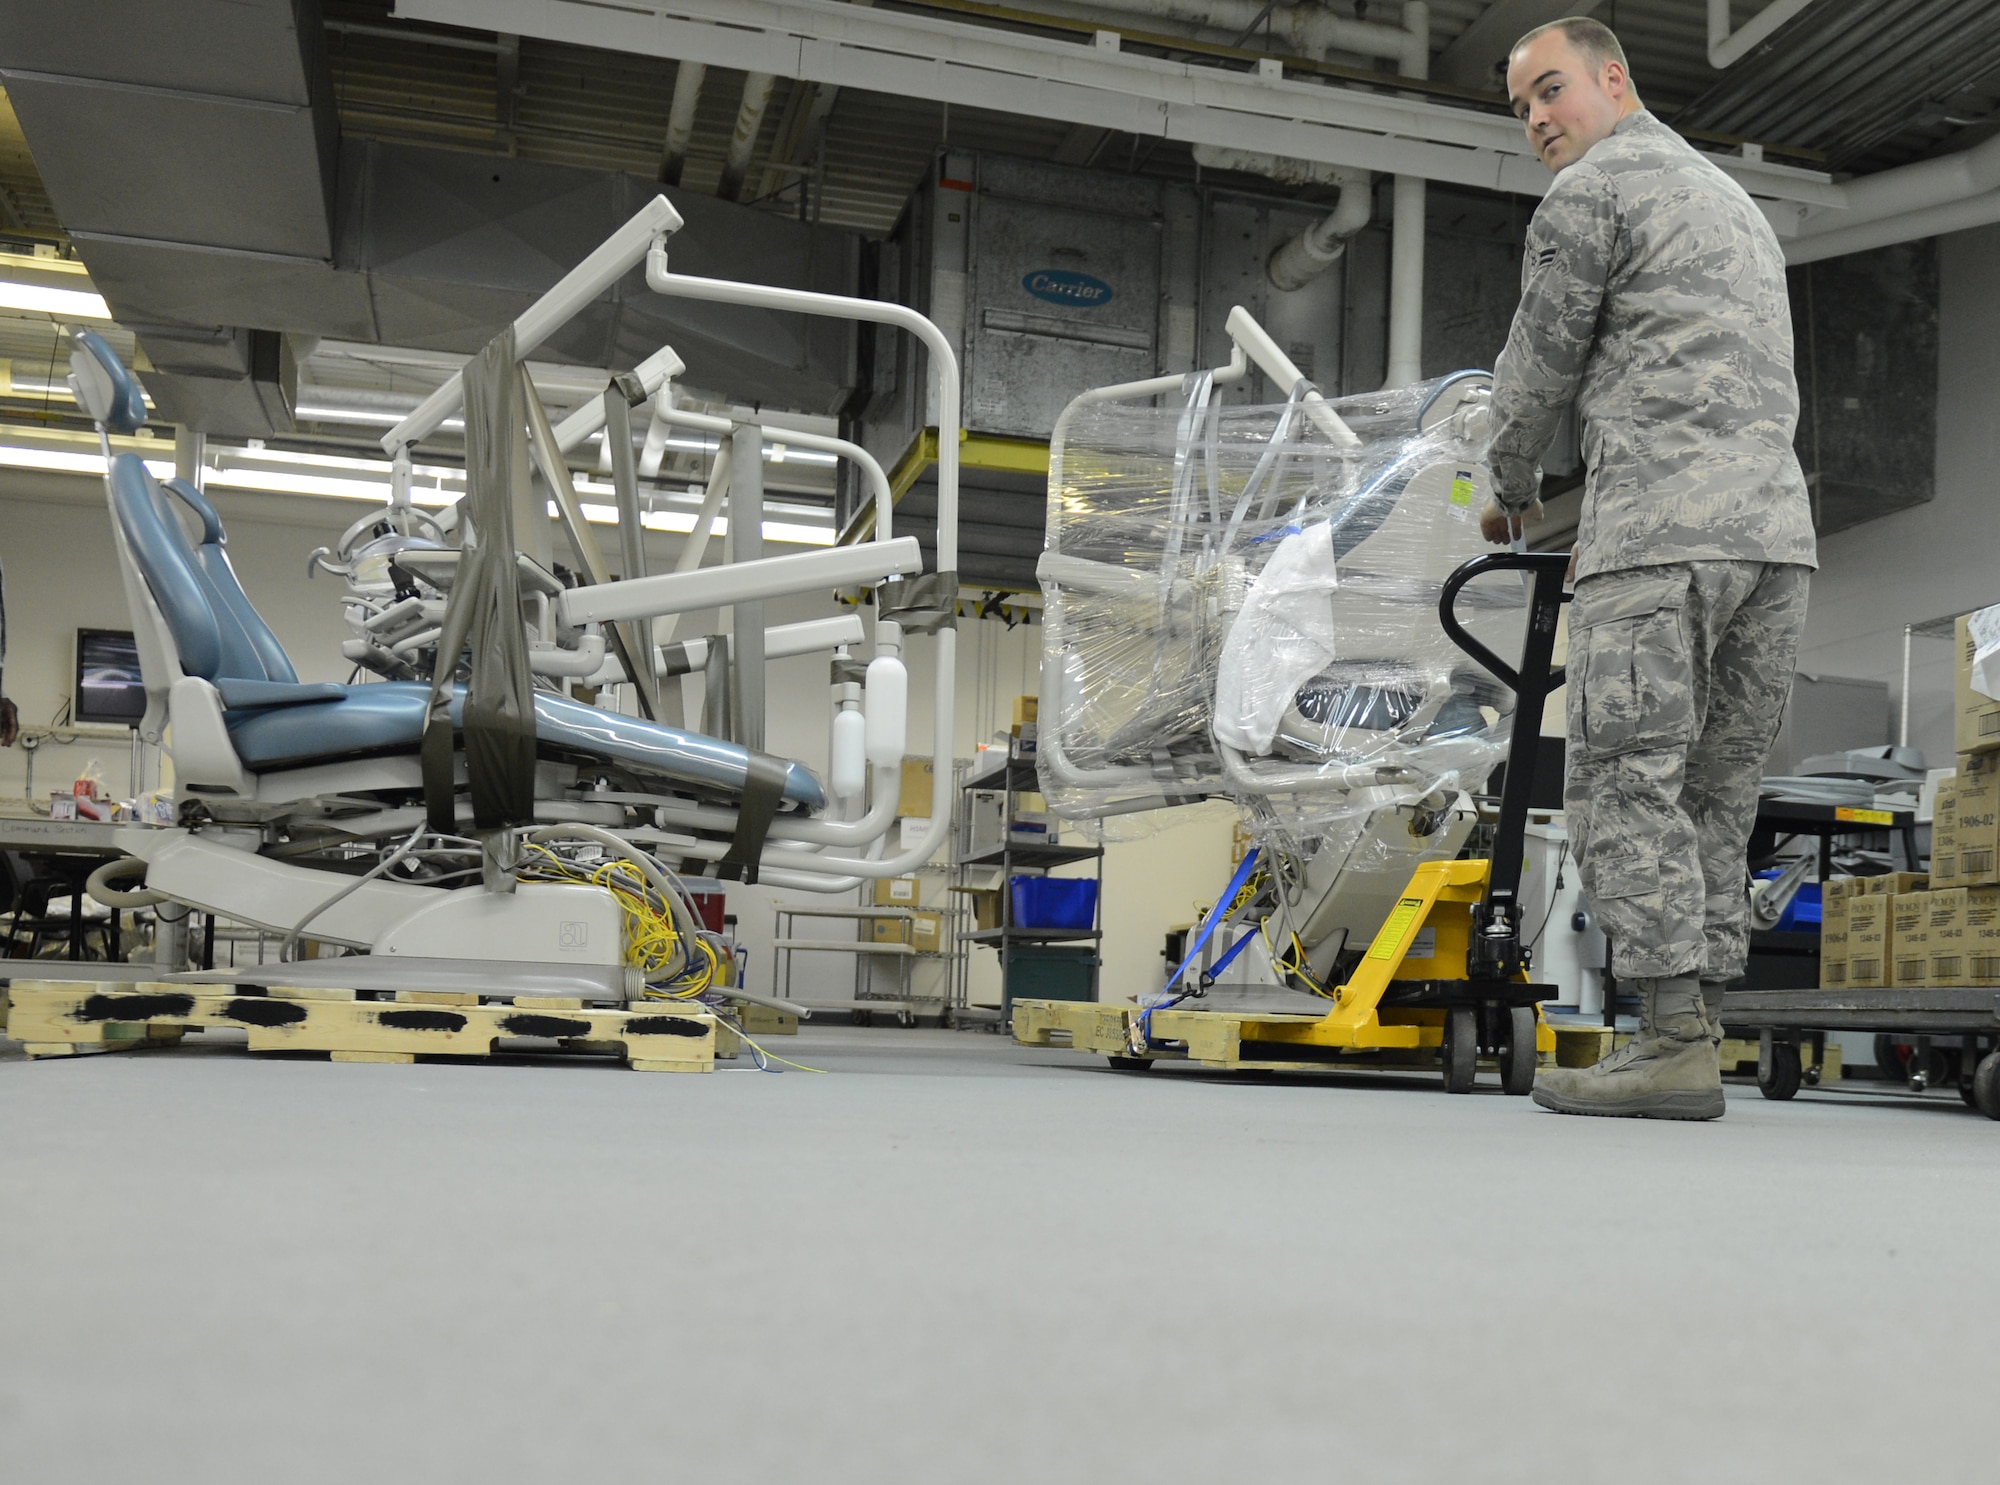 Airman 1st Class Jordan Williams, 2nd Medical Support Squadron Medical Logistics, uses a pallet jack to move a dental chair on Barksdale Air Force Base, La., May 21, 2013. Whenever equipment breaks or is replaced, Medical Logistics Airmen send the equipment to the Defense Reutilization Marketing Office. (U.S. Air Force photo/Senior Airman Micaiah Anthony)